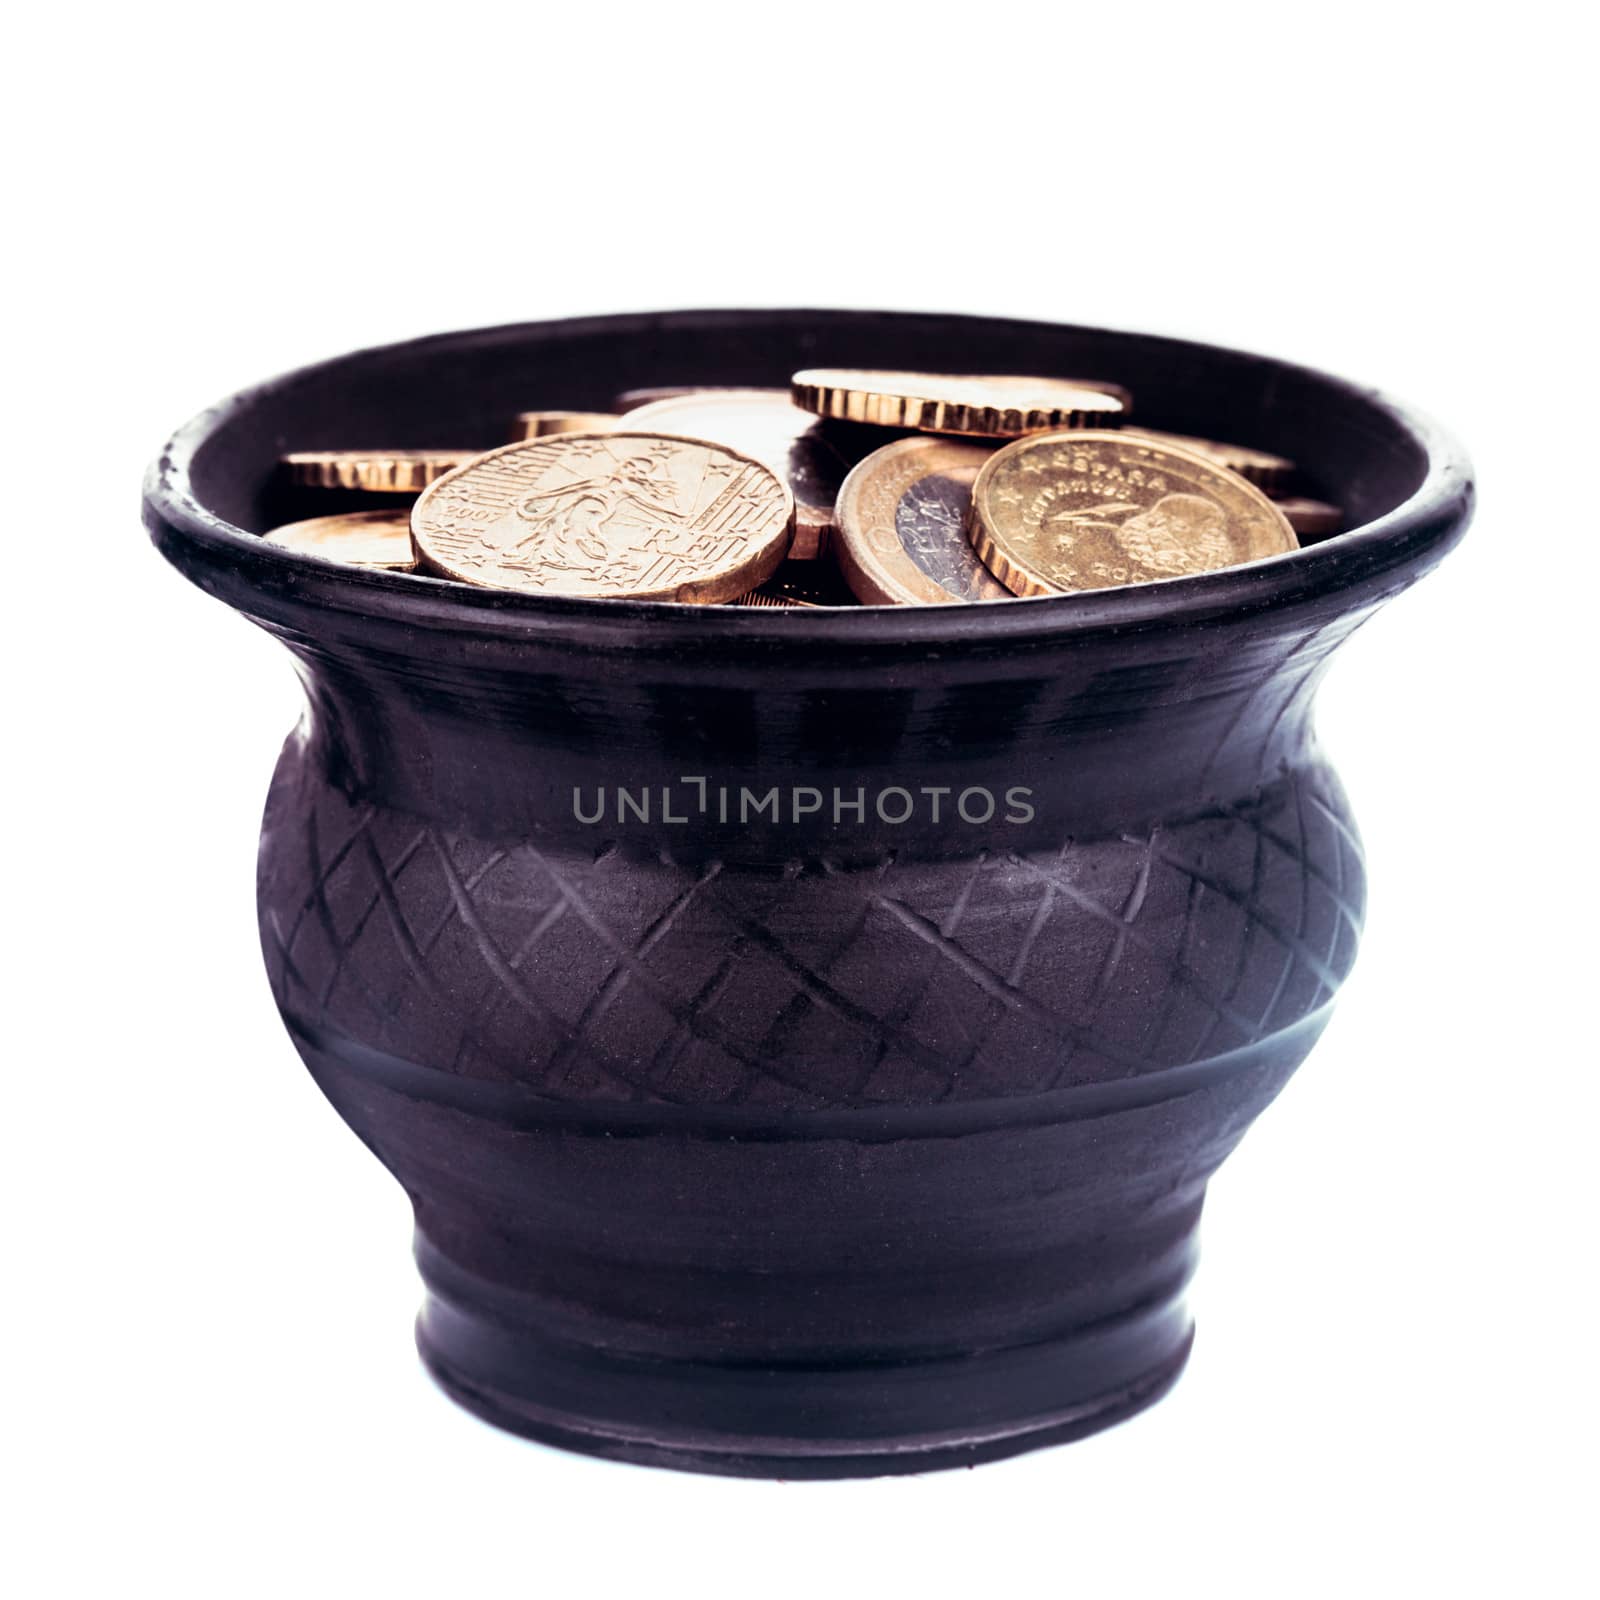 Pot with golden coins by oksix